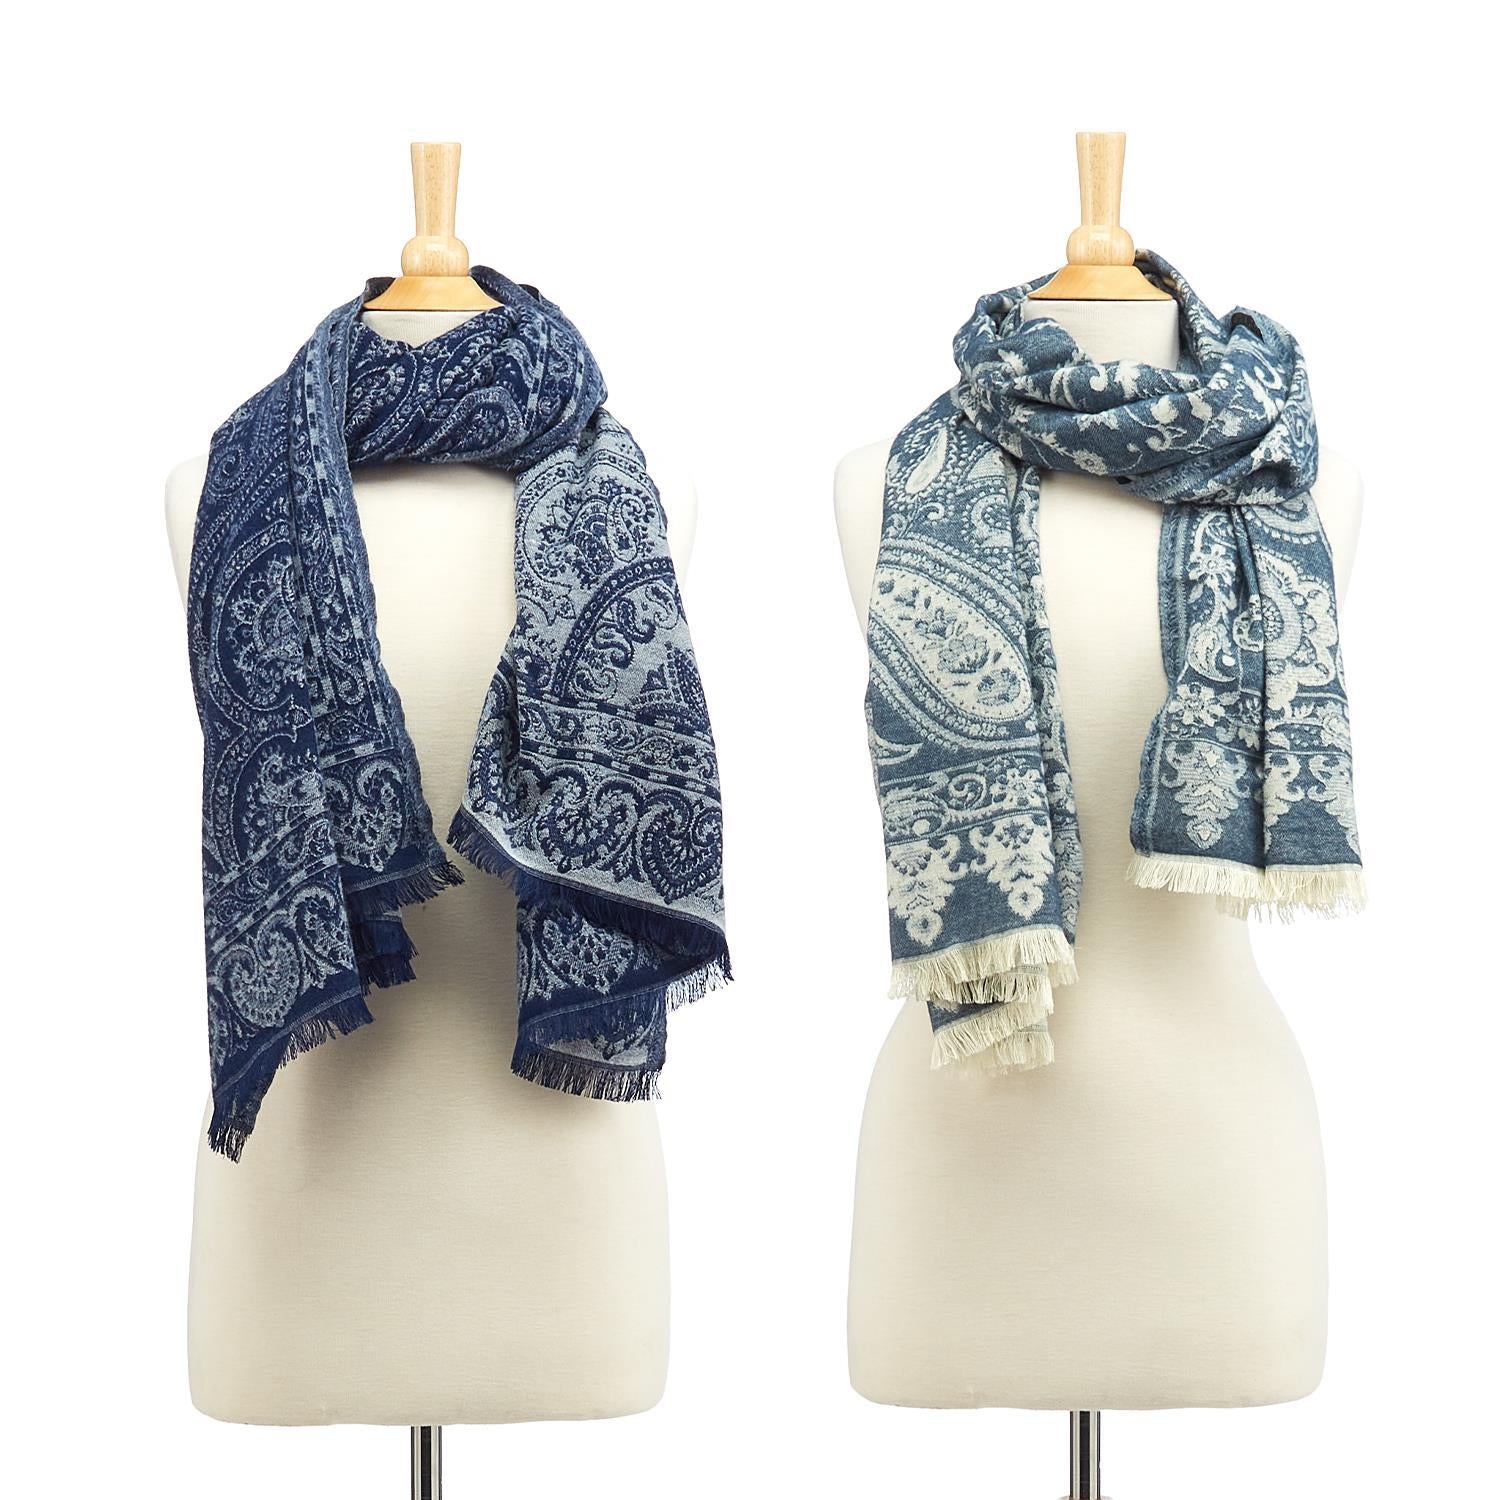 The perfect accessory to keep you warm and stylish during the colder months. These scarves feature a beautiful blue and white jacquard pattern that's both classic and on-trend.  Available in 2 colorways: dark or light 72"L Super soft brushed acrylic